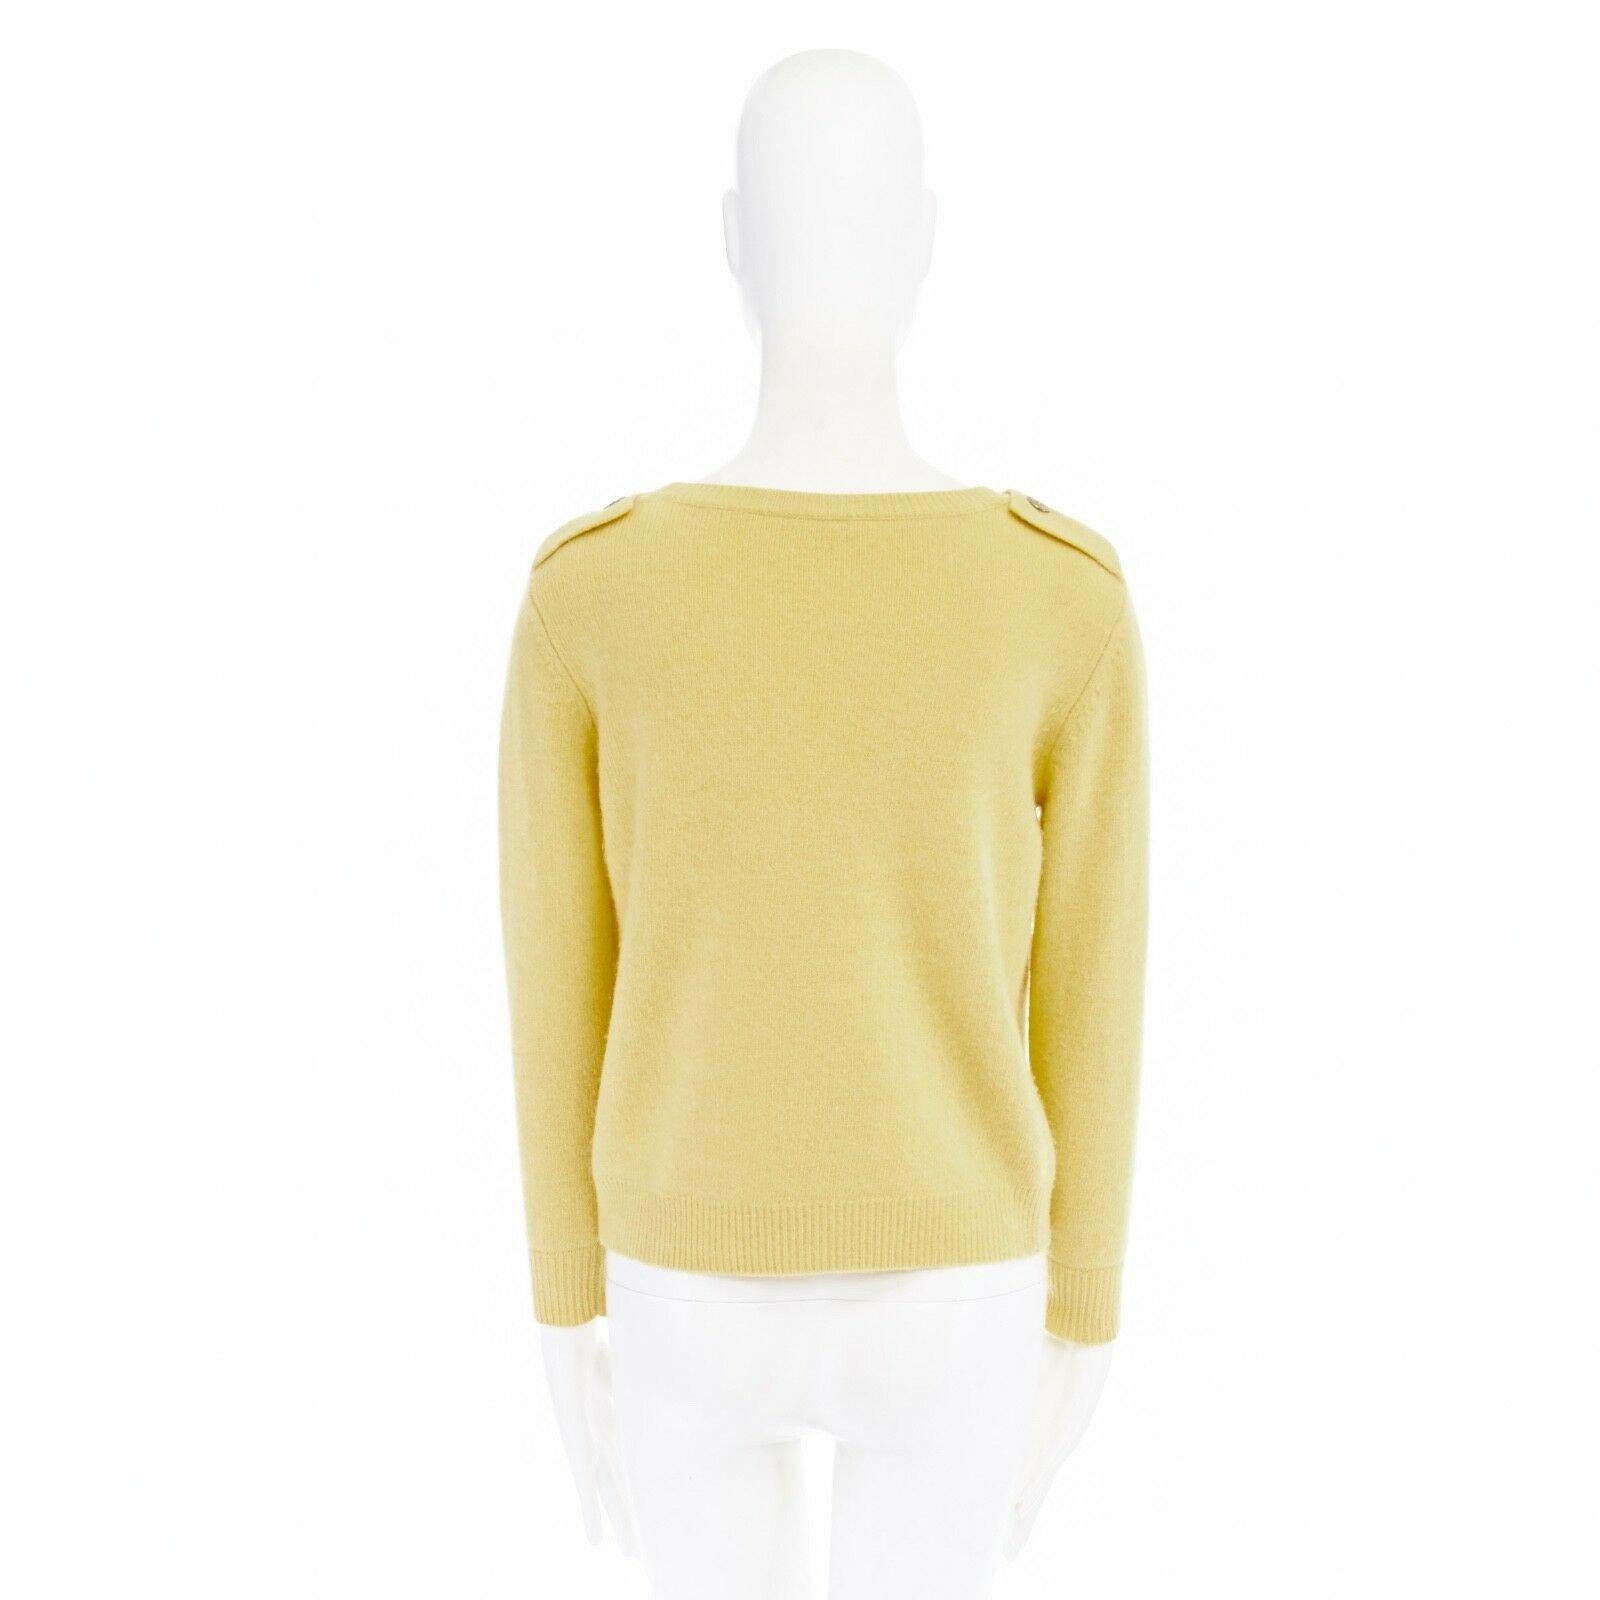 Yellow MAX & CO. MAX MARA 100% wool canary yellow patch pocket sweater top S